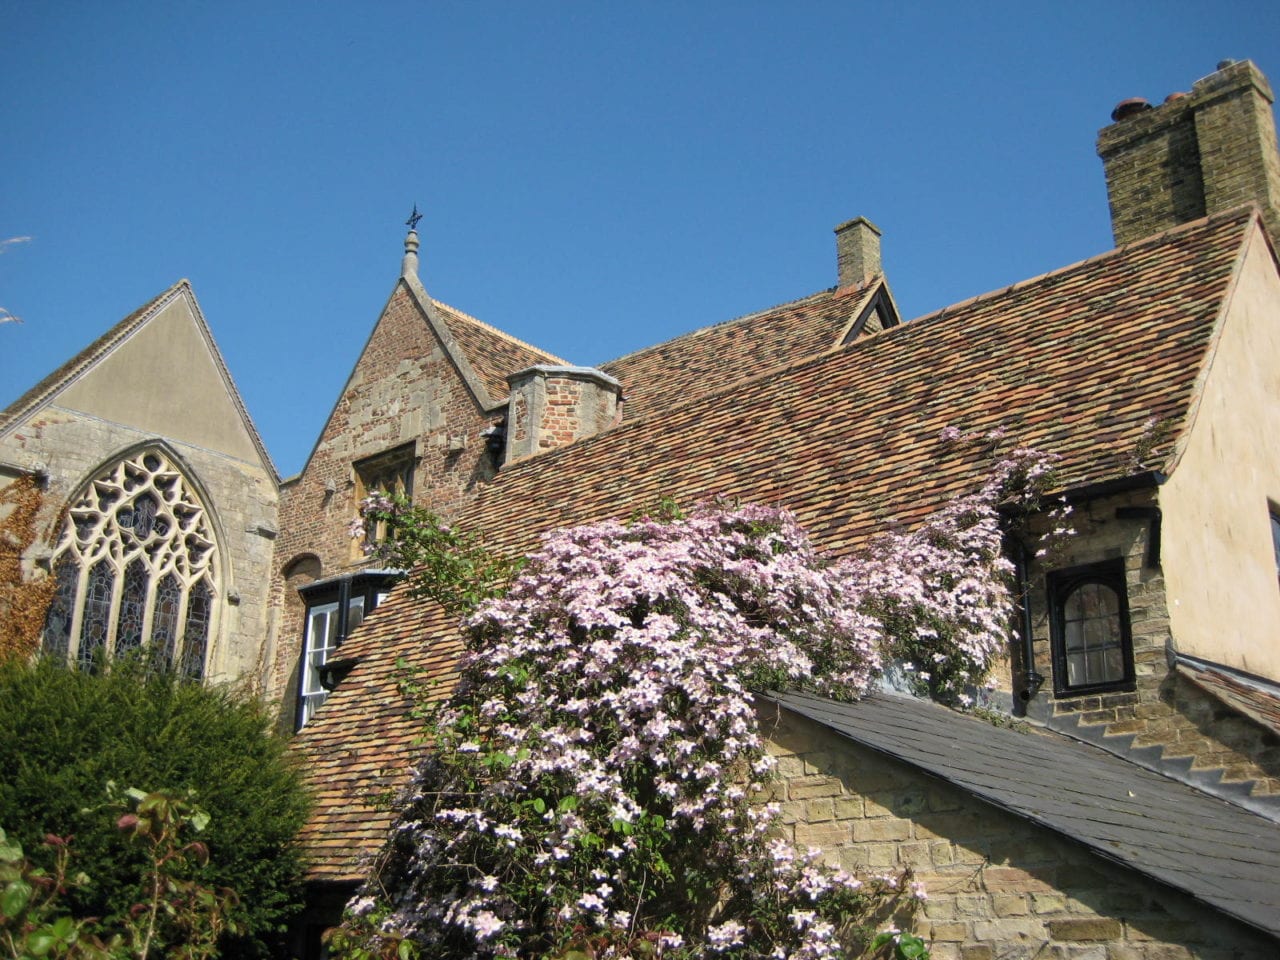 Buildings at historic King's Ely school